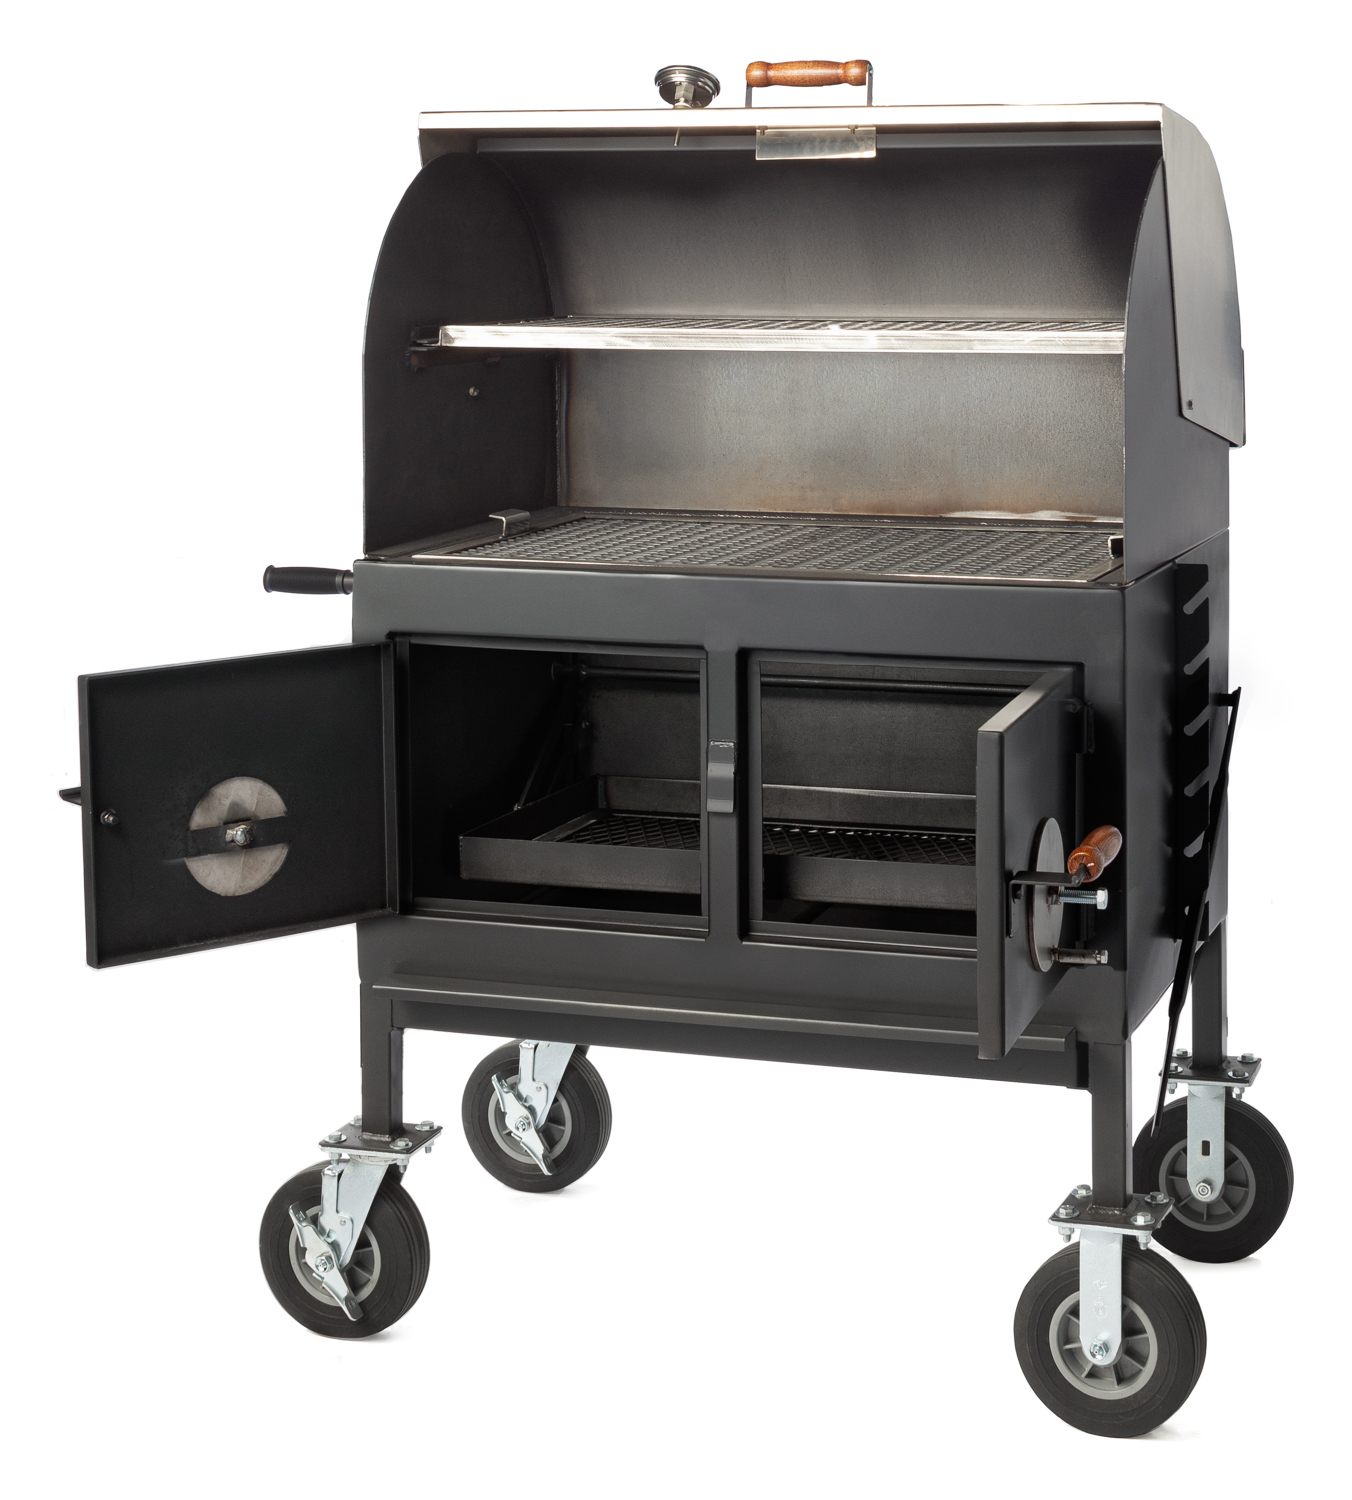 Adjustable Charcoal Grill - Pitts & Spitts